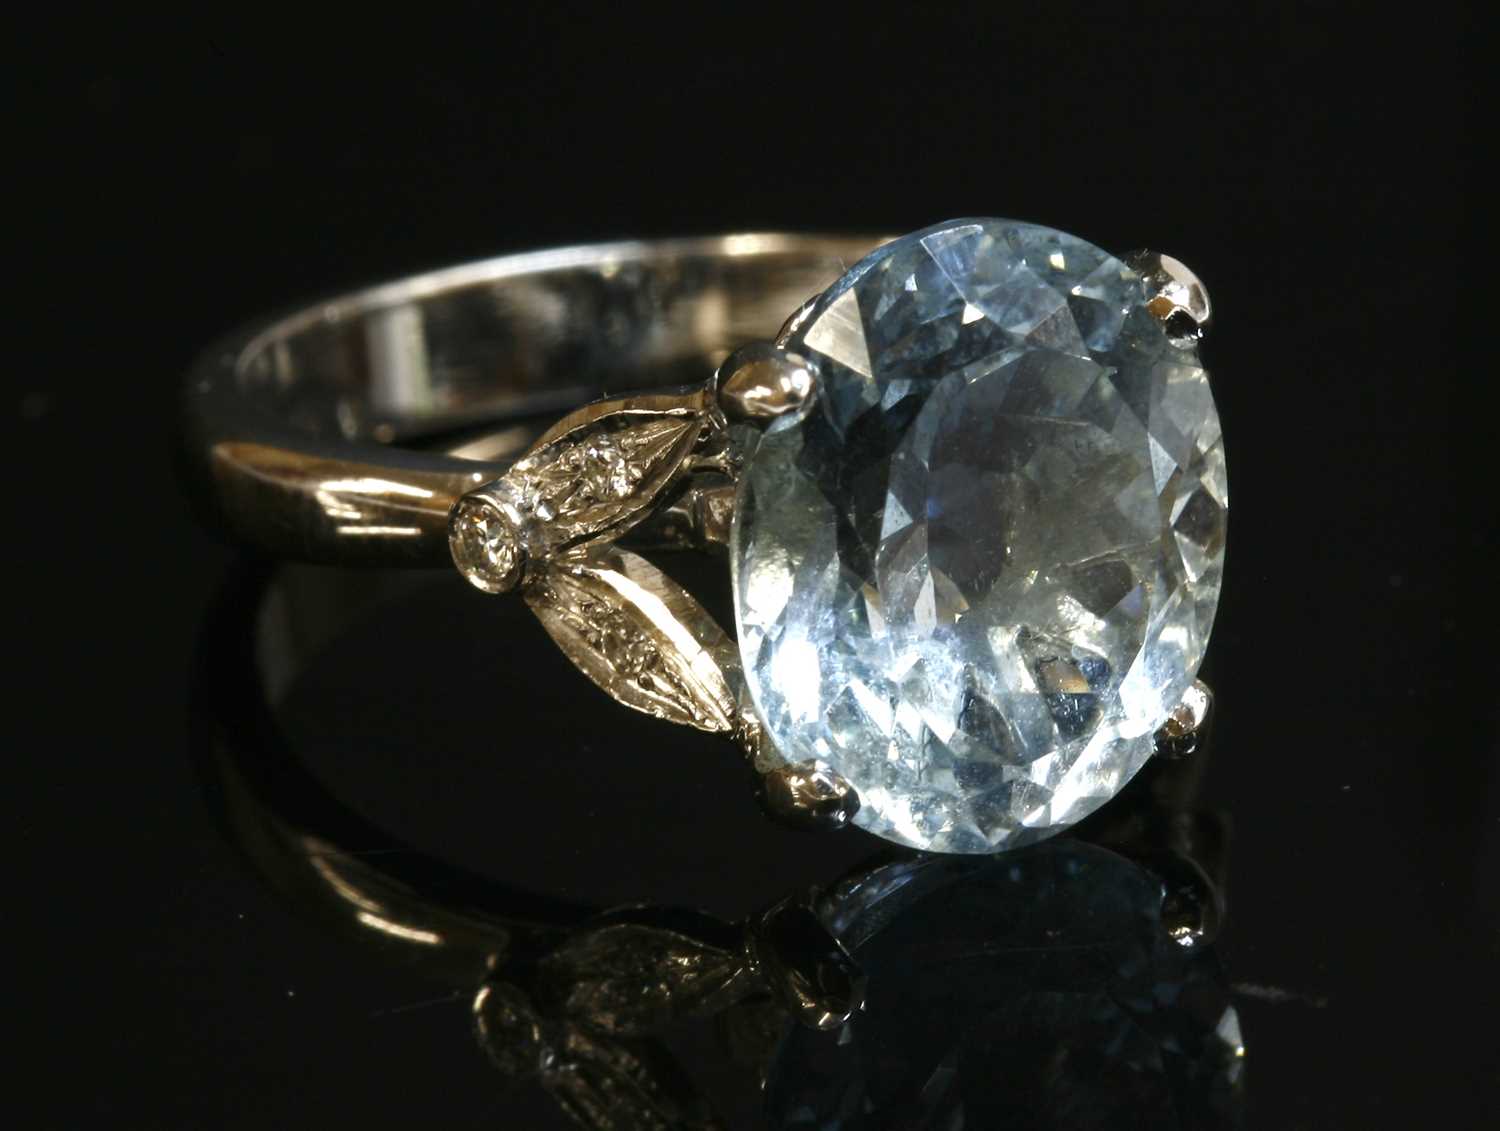 Lot 438 - An 18ct white gold single stone aquamarine ring with diamond set shoulders